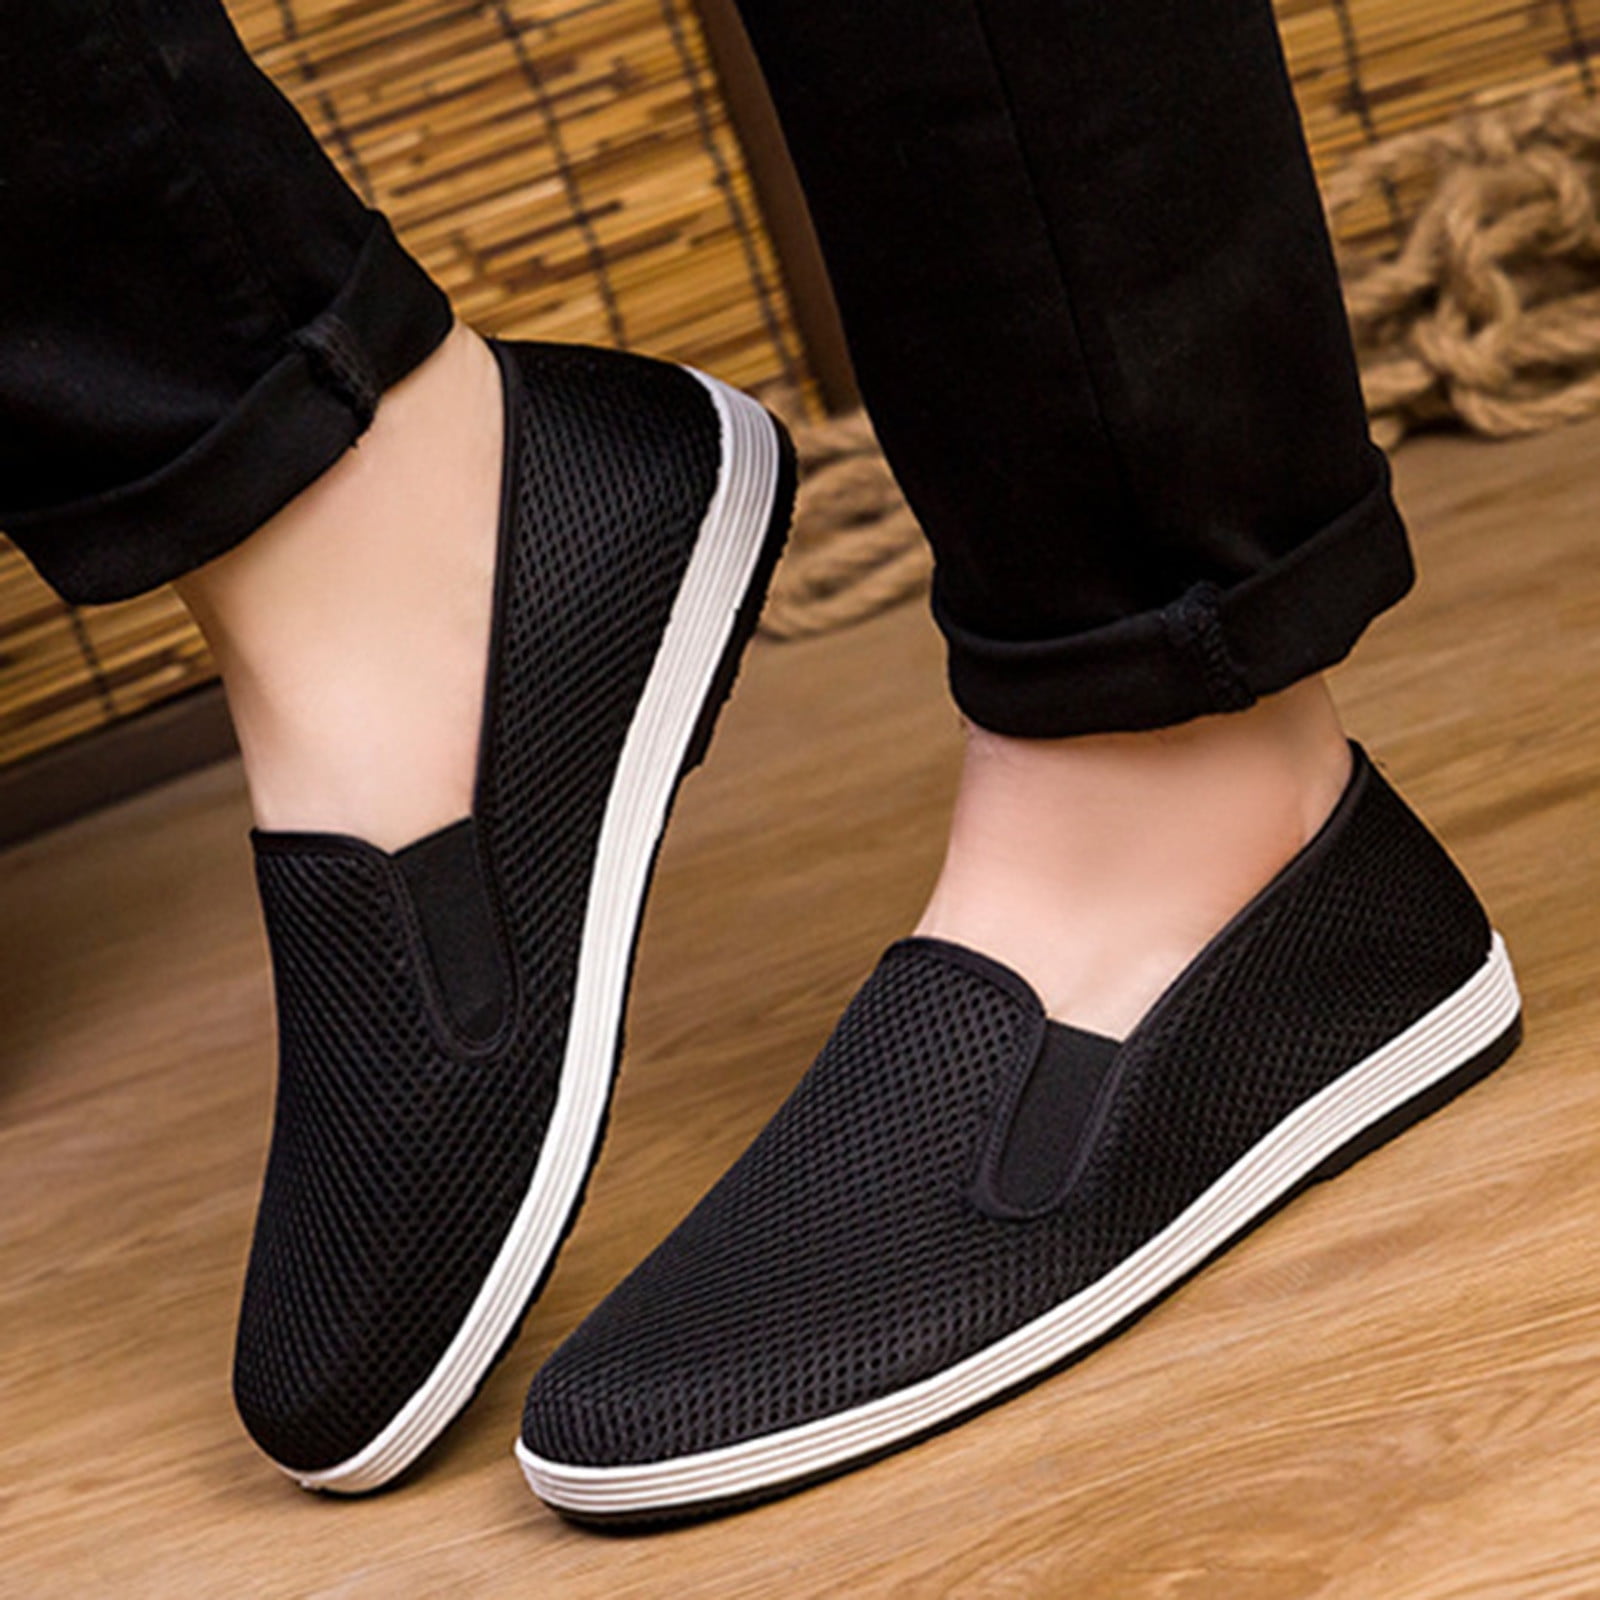 Mens New Slip On Casual Stitched Smart Office Work Shoes UK Size 6-11 